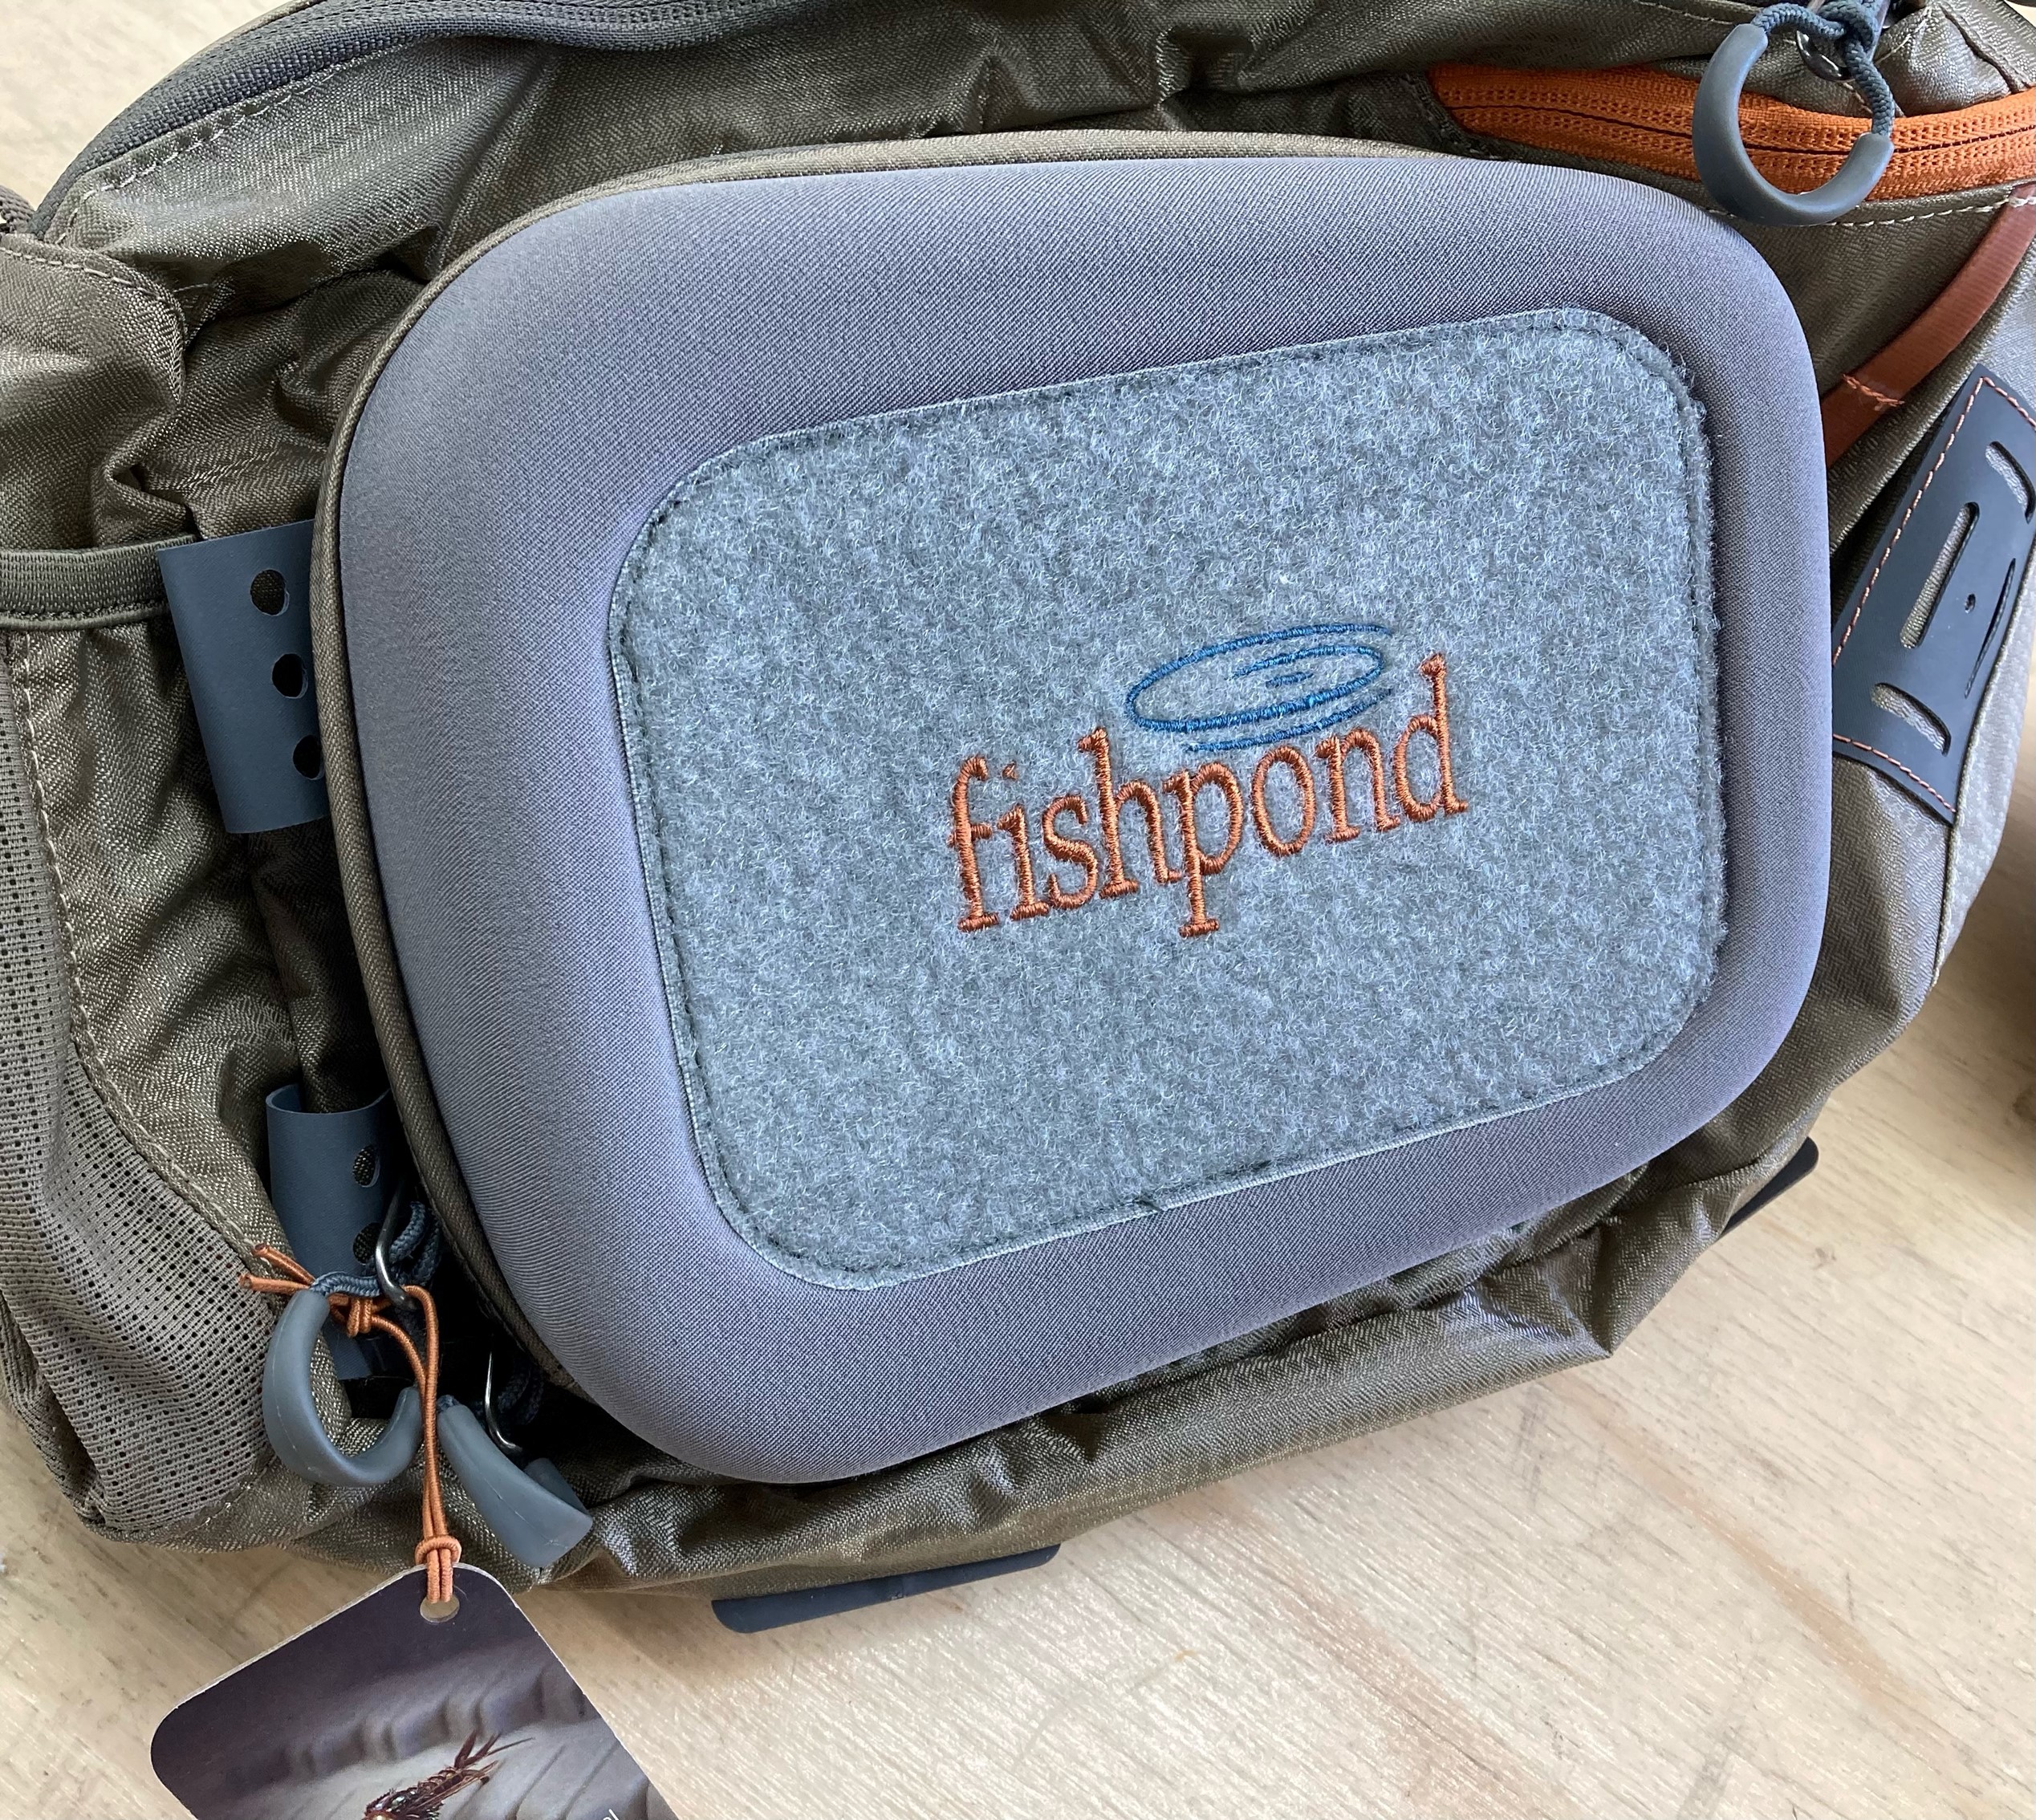 NEW 2022: Fishpond Summit Sling 2.0 Gear Review 